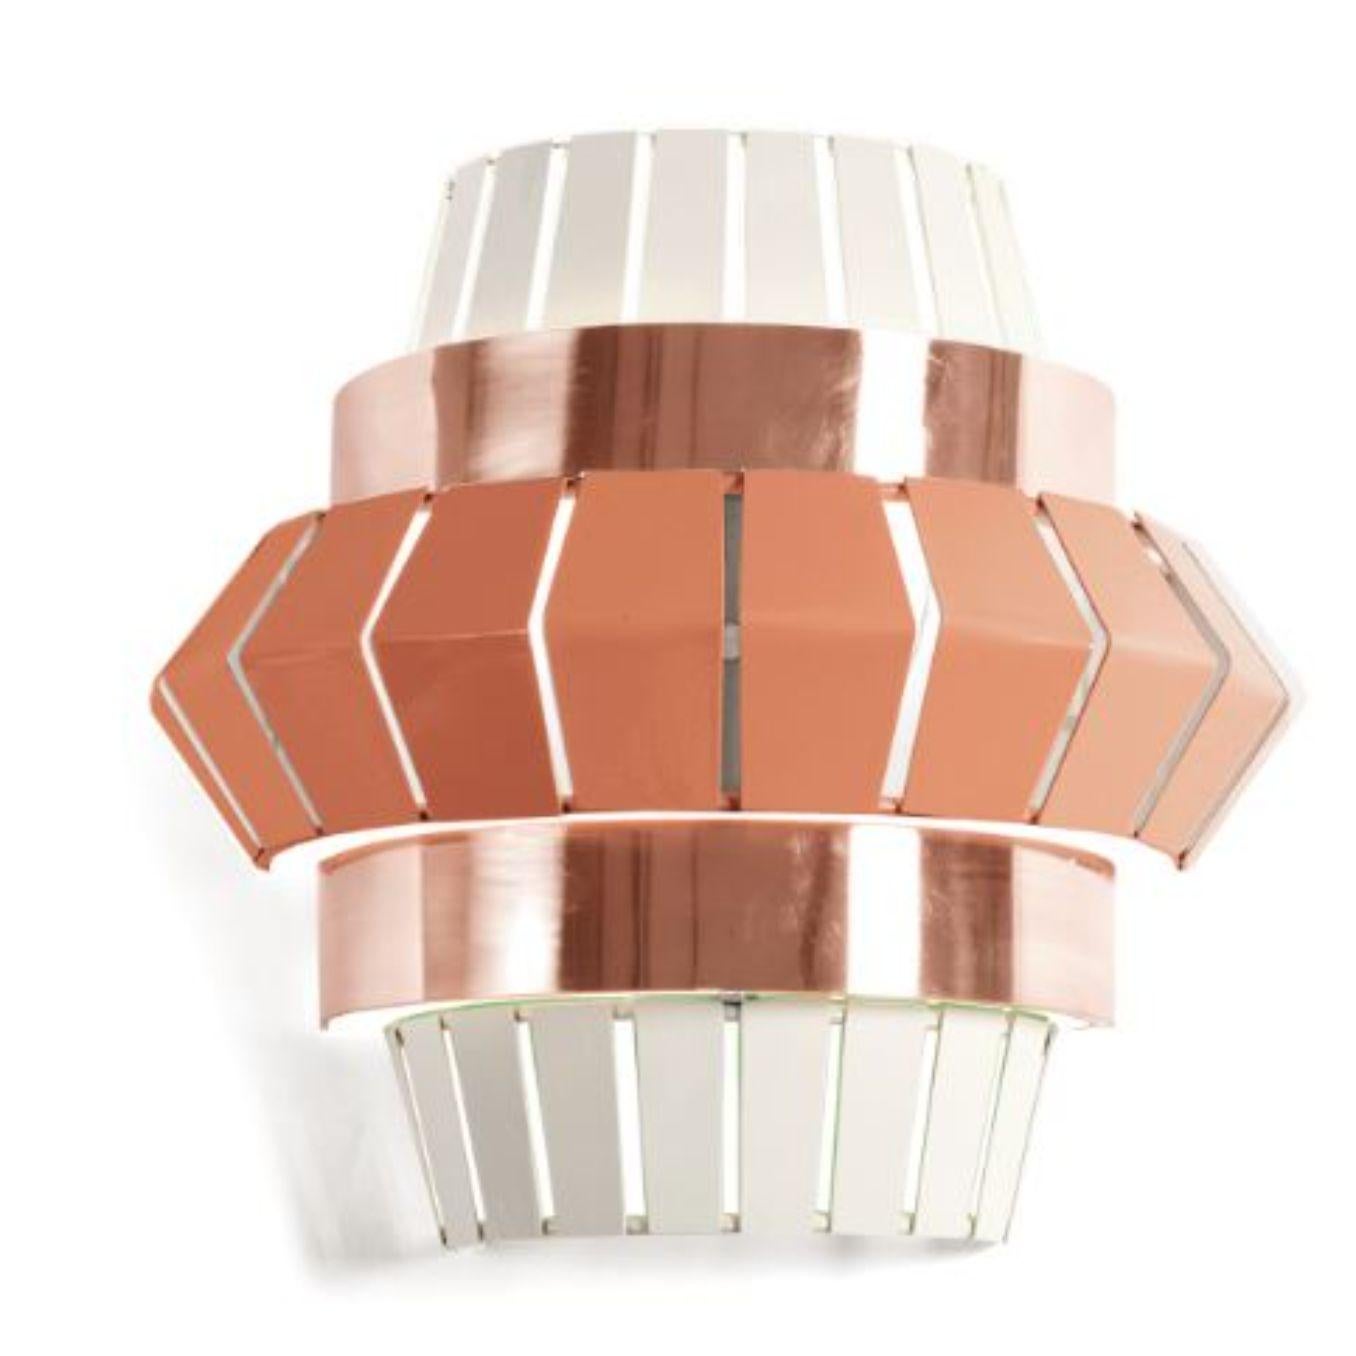 Salmon and Ivory comb wall lamp with copper ring by Dooq
Dimensions: W 37 x D 13 x H 34 cm
Materials: lacquered metal, polished copper.
Also available in different colors and materials.

Information:
230V/50Hz
E14/1x20W LED
120V/60Hz
E12/1x15W